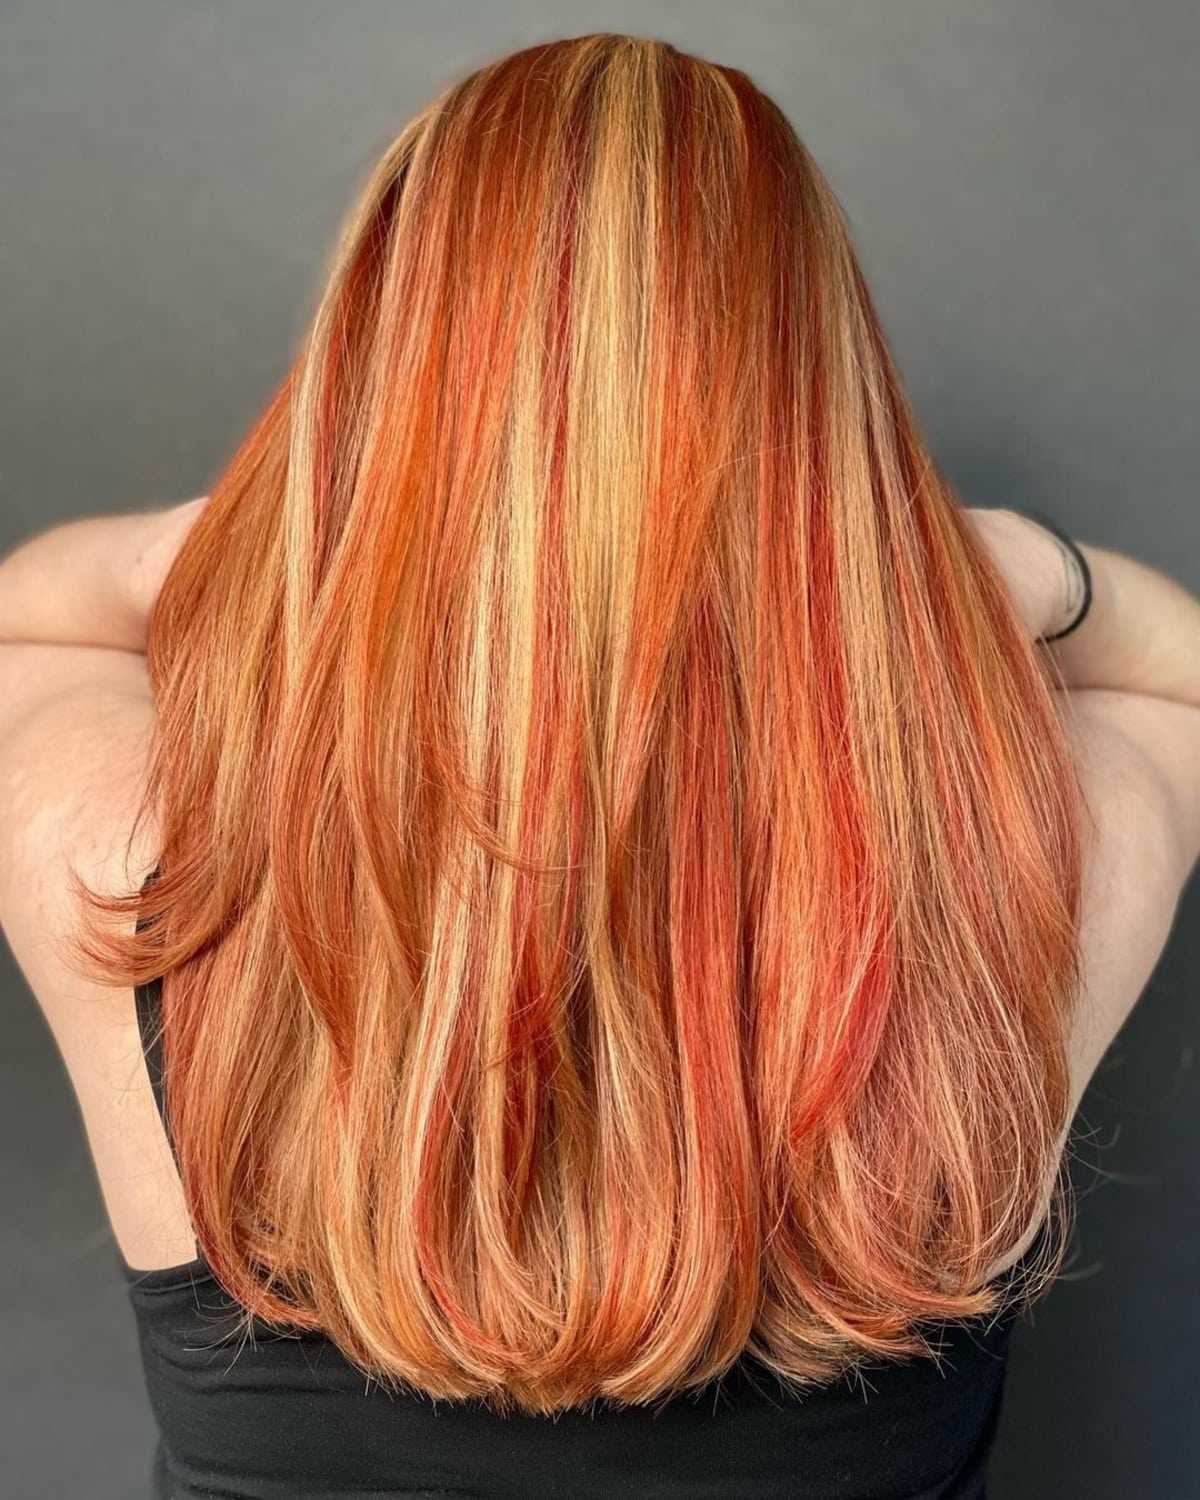 26 Trendy Ways to Pair Red Hair with Highlights (Photos)